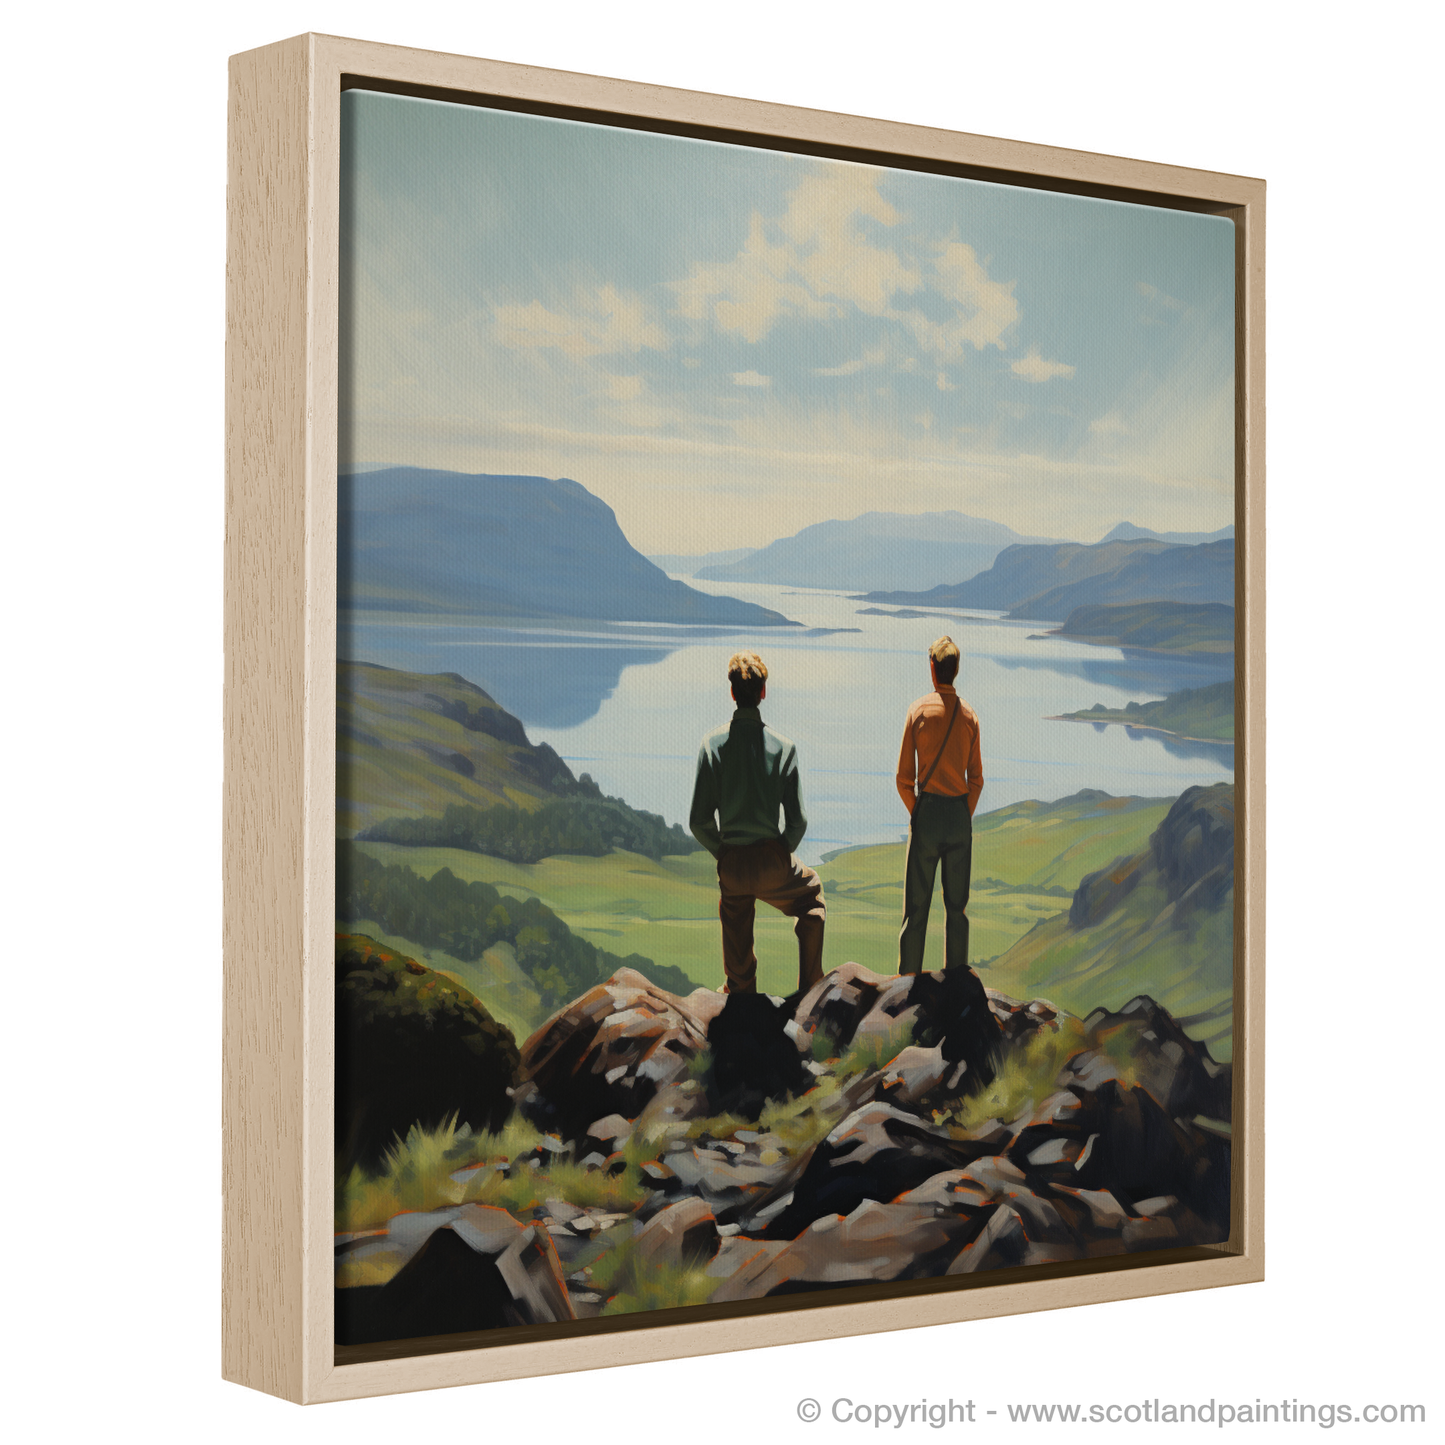 Painting and Art Print of Two hikers looking out on Loch Lomond entitled "Reflections on Loch Lomond: A Hiker's View".